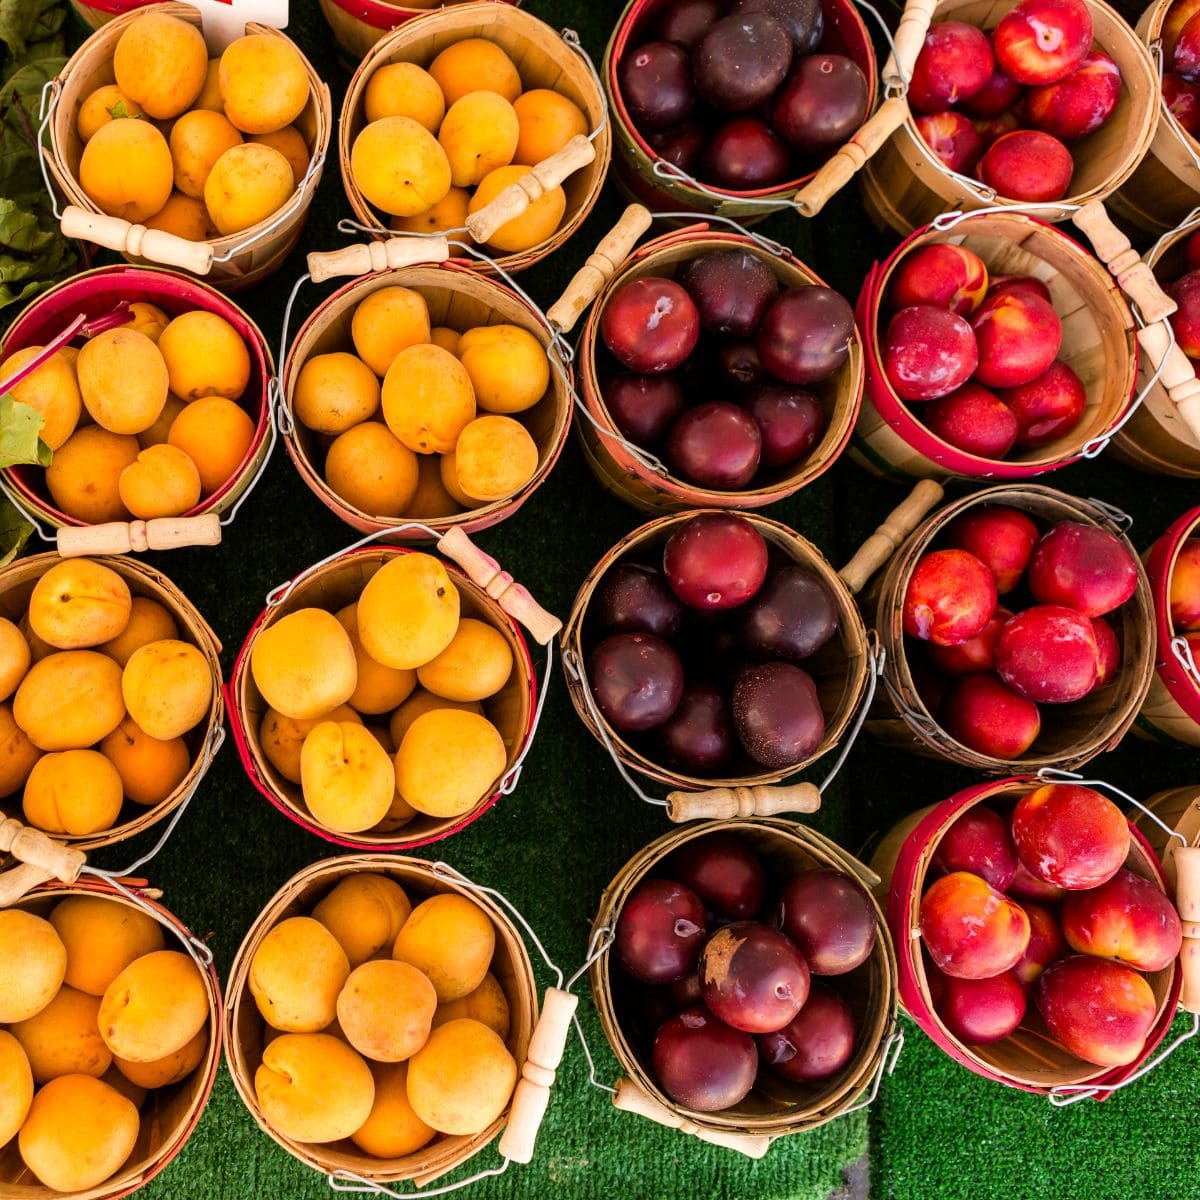 yellow and purple plums in baskets from above.